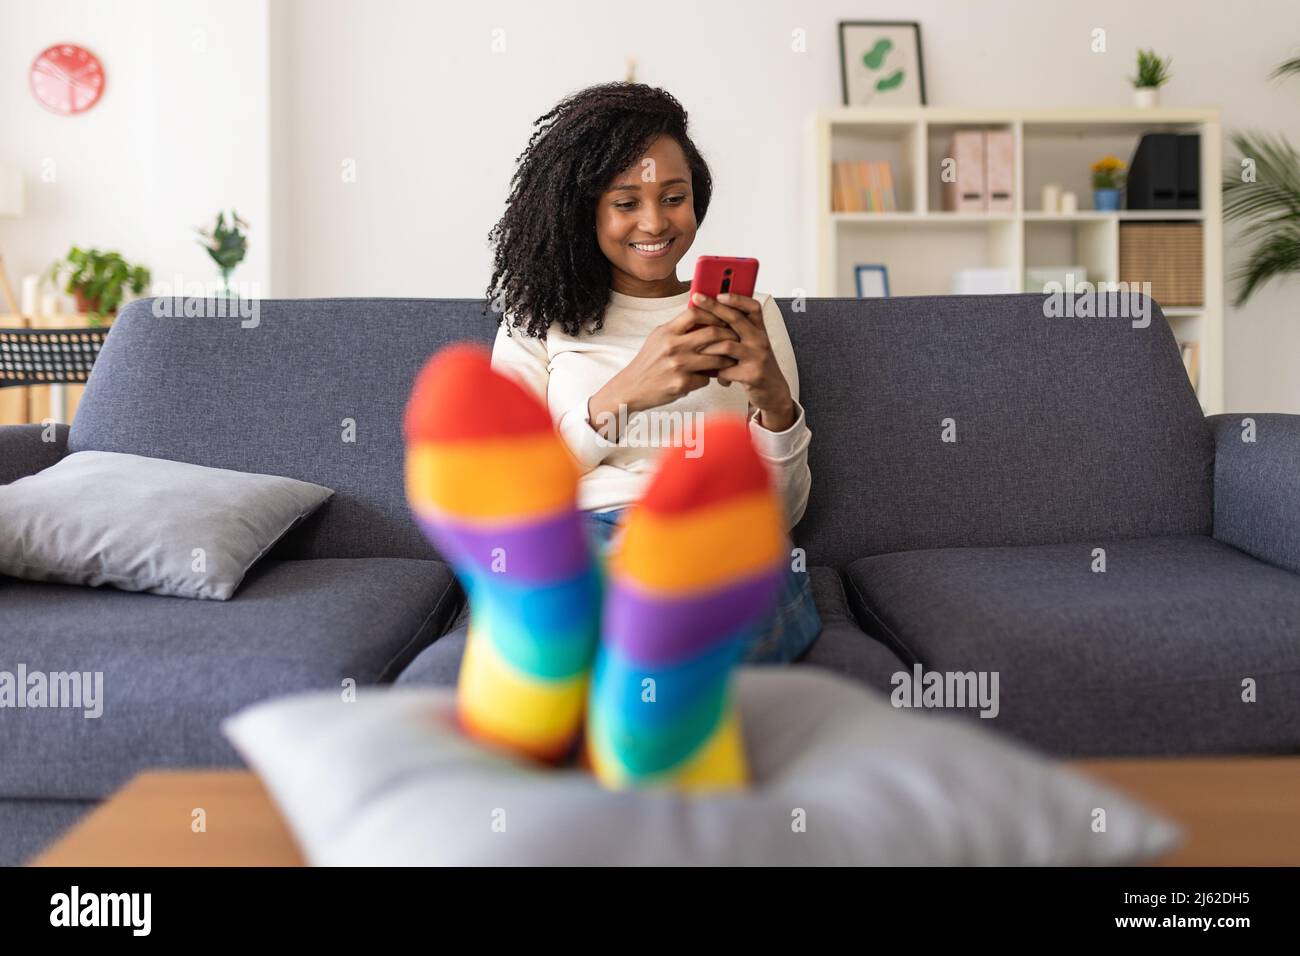 Smiling young woman using a mobile phone while relaxing on sofa at home. Stock Photo